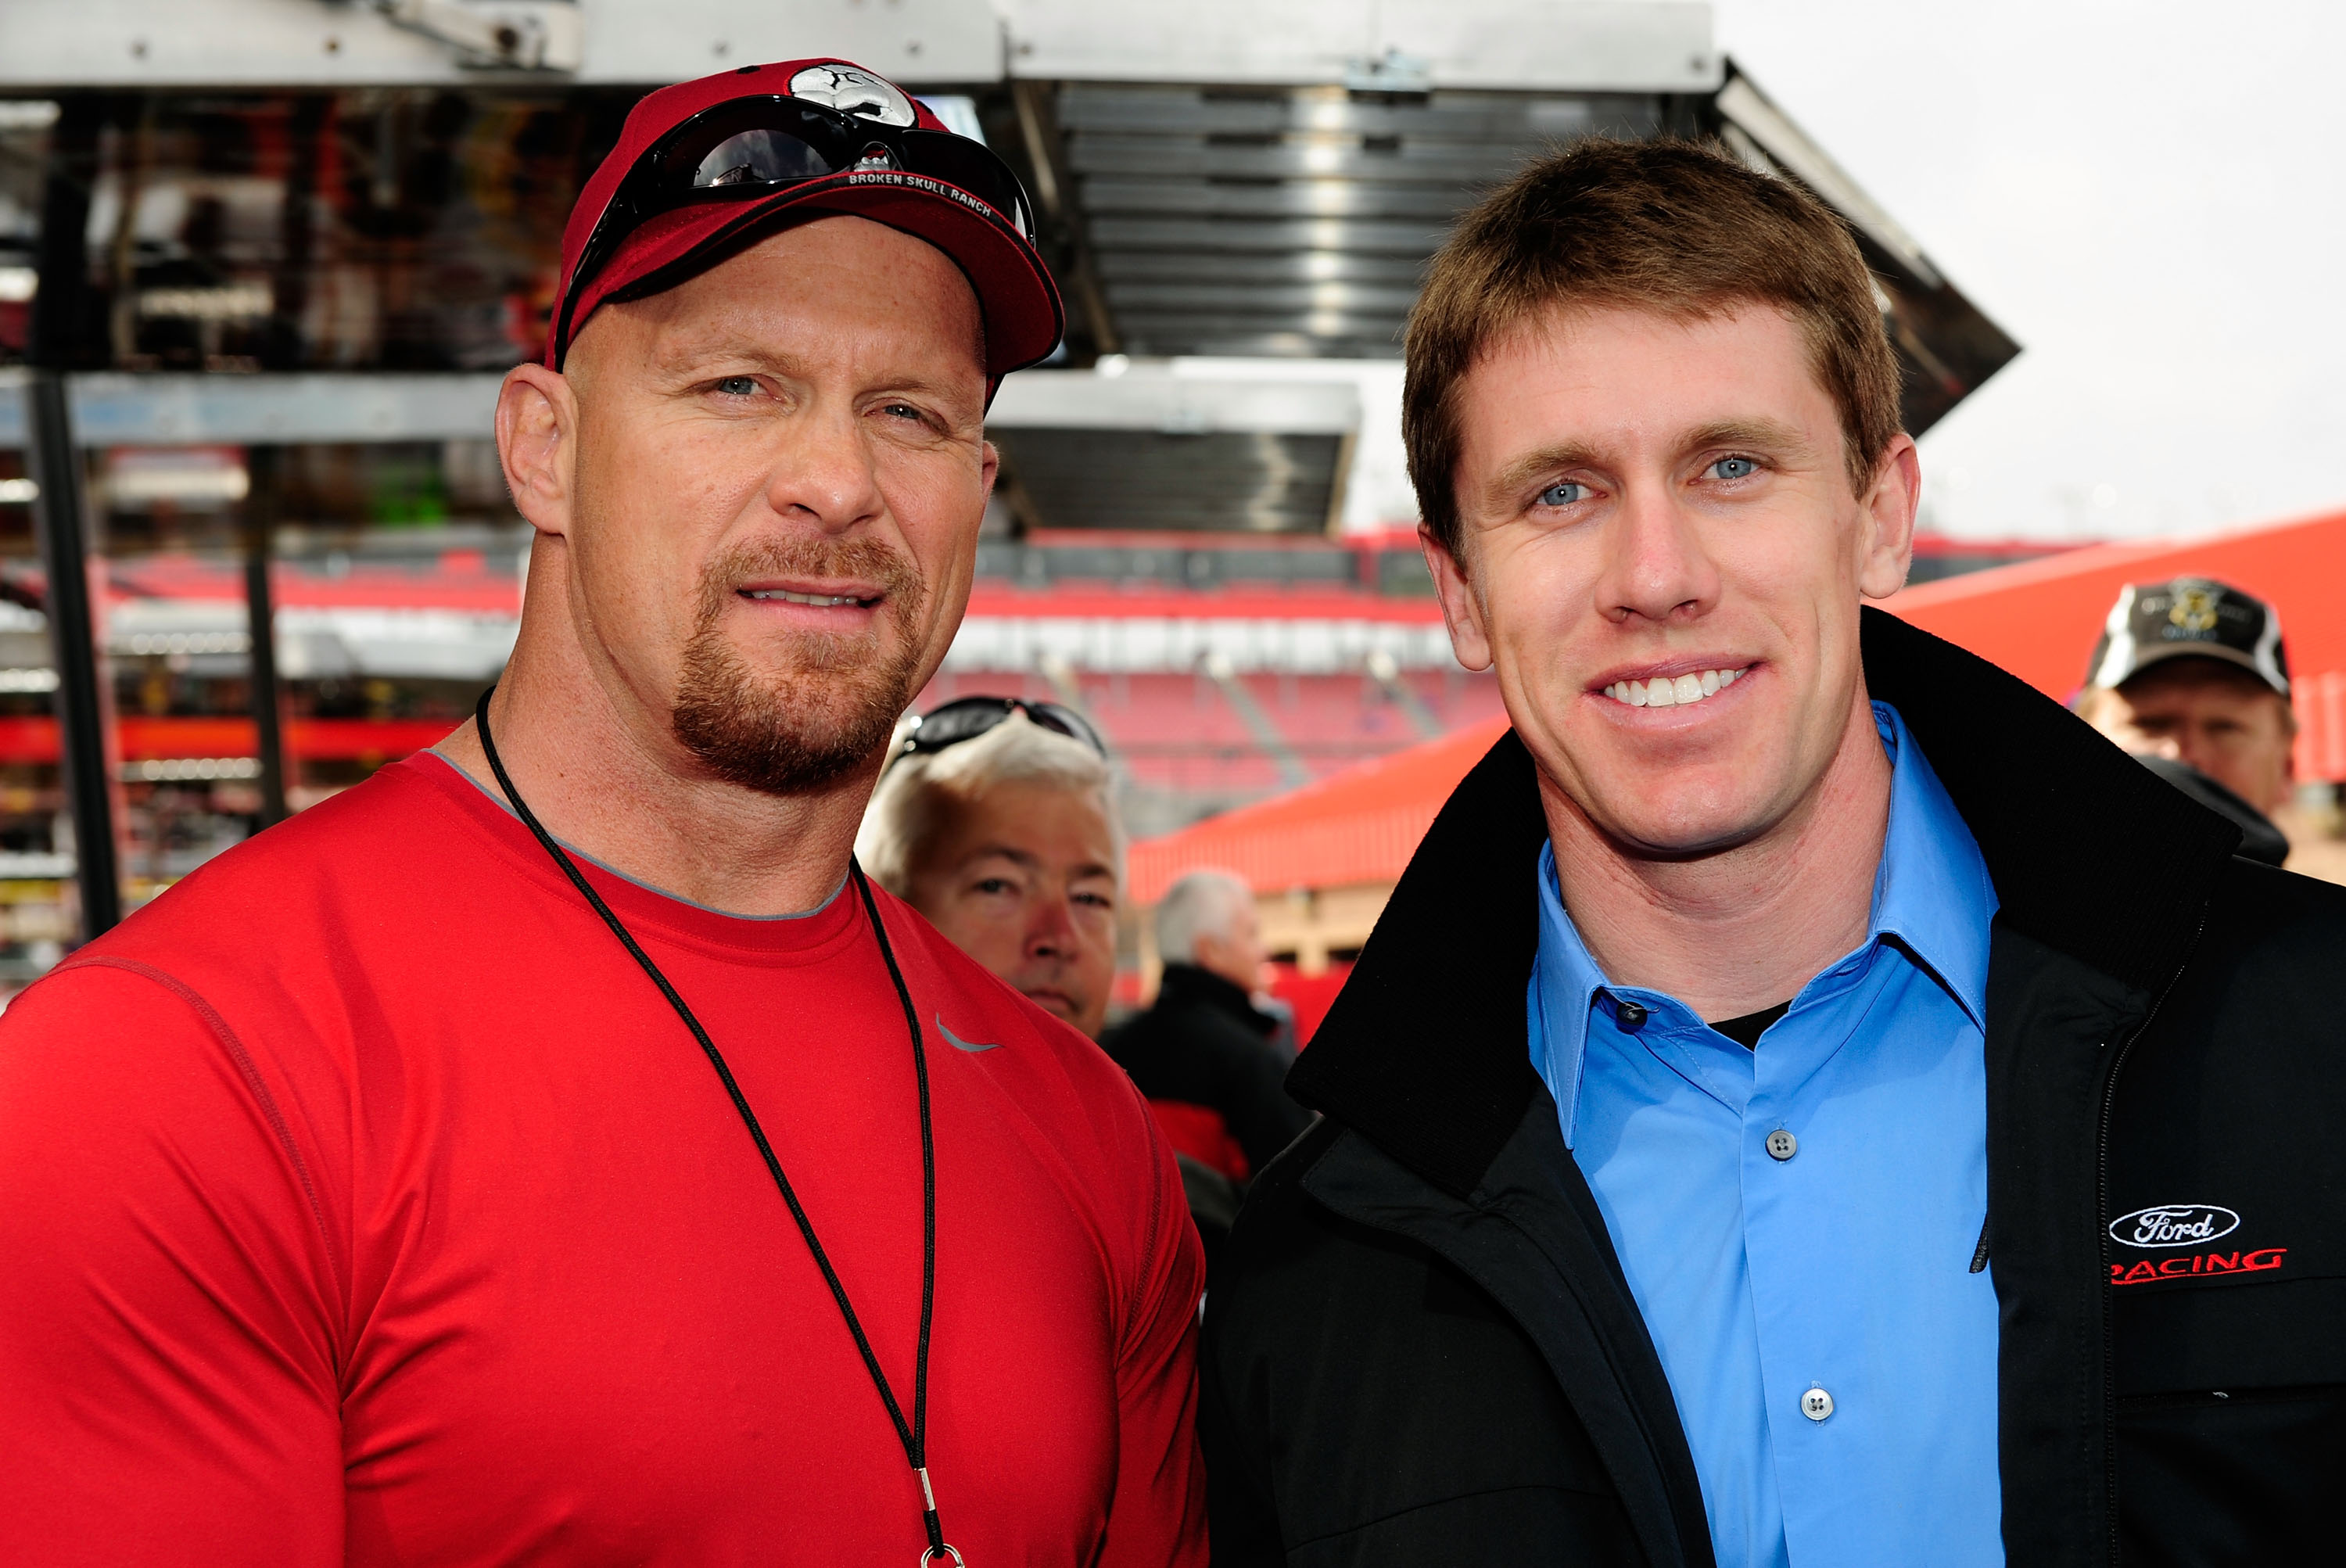 FONTANA, CA - FEBRUARY 21:  Actor Steve Austin and Carl Edwards, driver of the #99 Aflac Ford, pose for a photo in the garage area prior to the NASCAR Sprint Cup Series Auto Club 500 at Auto Club Speedway on February 21, 2010 in Fontana, California.  (Pho